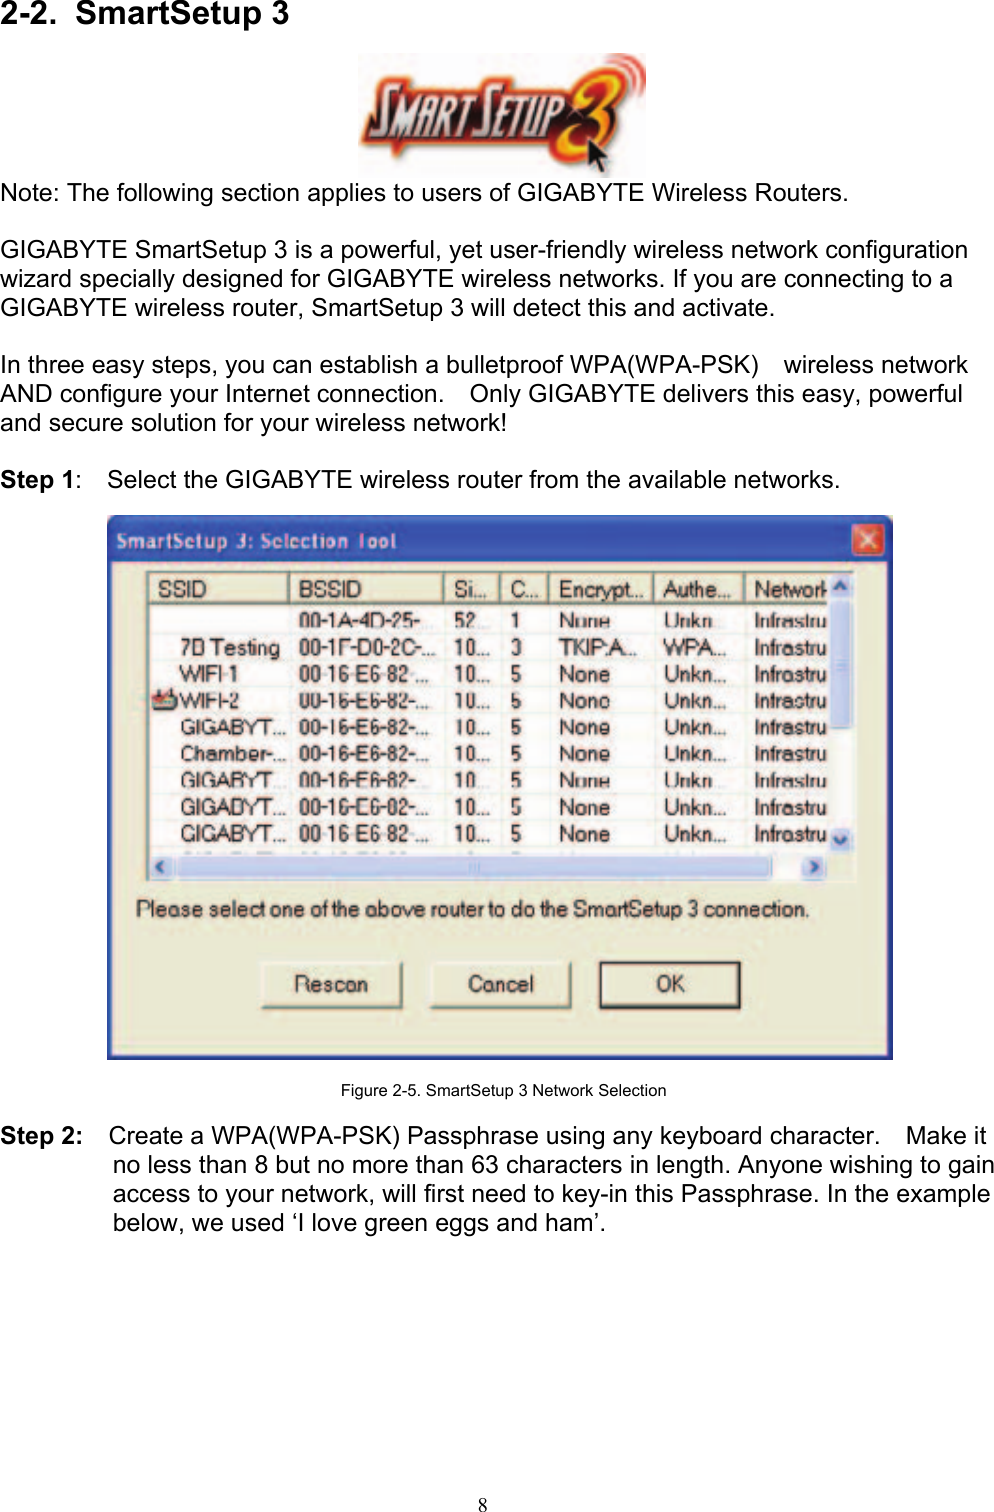 8     2-2. SmartSetup 3    Note: The following section applies to users of GIGABYTE Wireless Routers.  GIGABYTE SmartSetup 3 is a powerful, yet user-friendly wireless network configuration wizard specially designed for GIGABYTE wireless networks. If you are connecting to a GIGABYTE wireless router, SmartSetup 3 will detect this and activate.      In three easy steps, you can establish a bulletproof WPA(WPA-PSK)  wireless network AND configure your Internet connection.    Only GIGABYTE delivers this easy, powerful and secure solution for your wireless network!  Step 1:    Select the GIGABYTE wireless router from the available networks.    Figure 2-5. SmartSetup 3 Network Selection  Step 2:    Create a WPA(WPA-PSK) Passphrase using any keyboard character.    Make it no less than 8 but no more than 63 characters in length. Anyone wishing to gain access to your network, will first need to key-in this Passphrase. In the example below, we used ‘I love green eggs and ham’.  